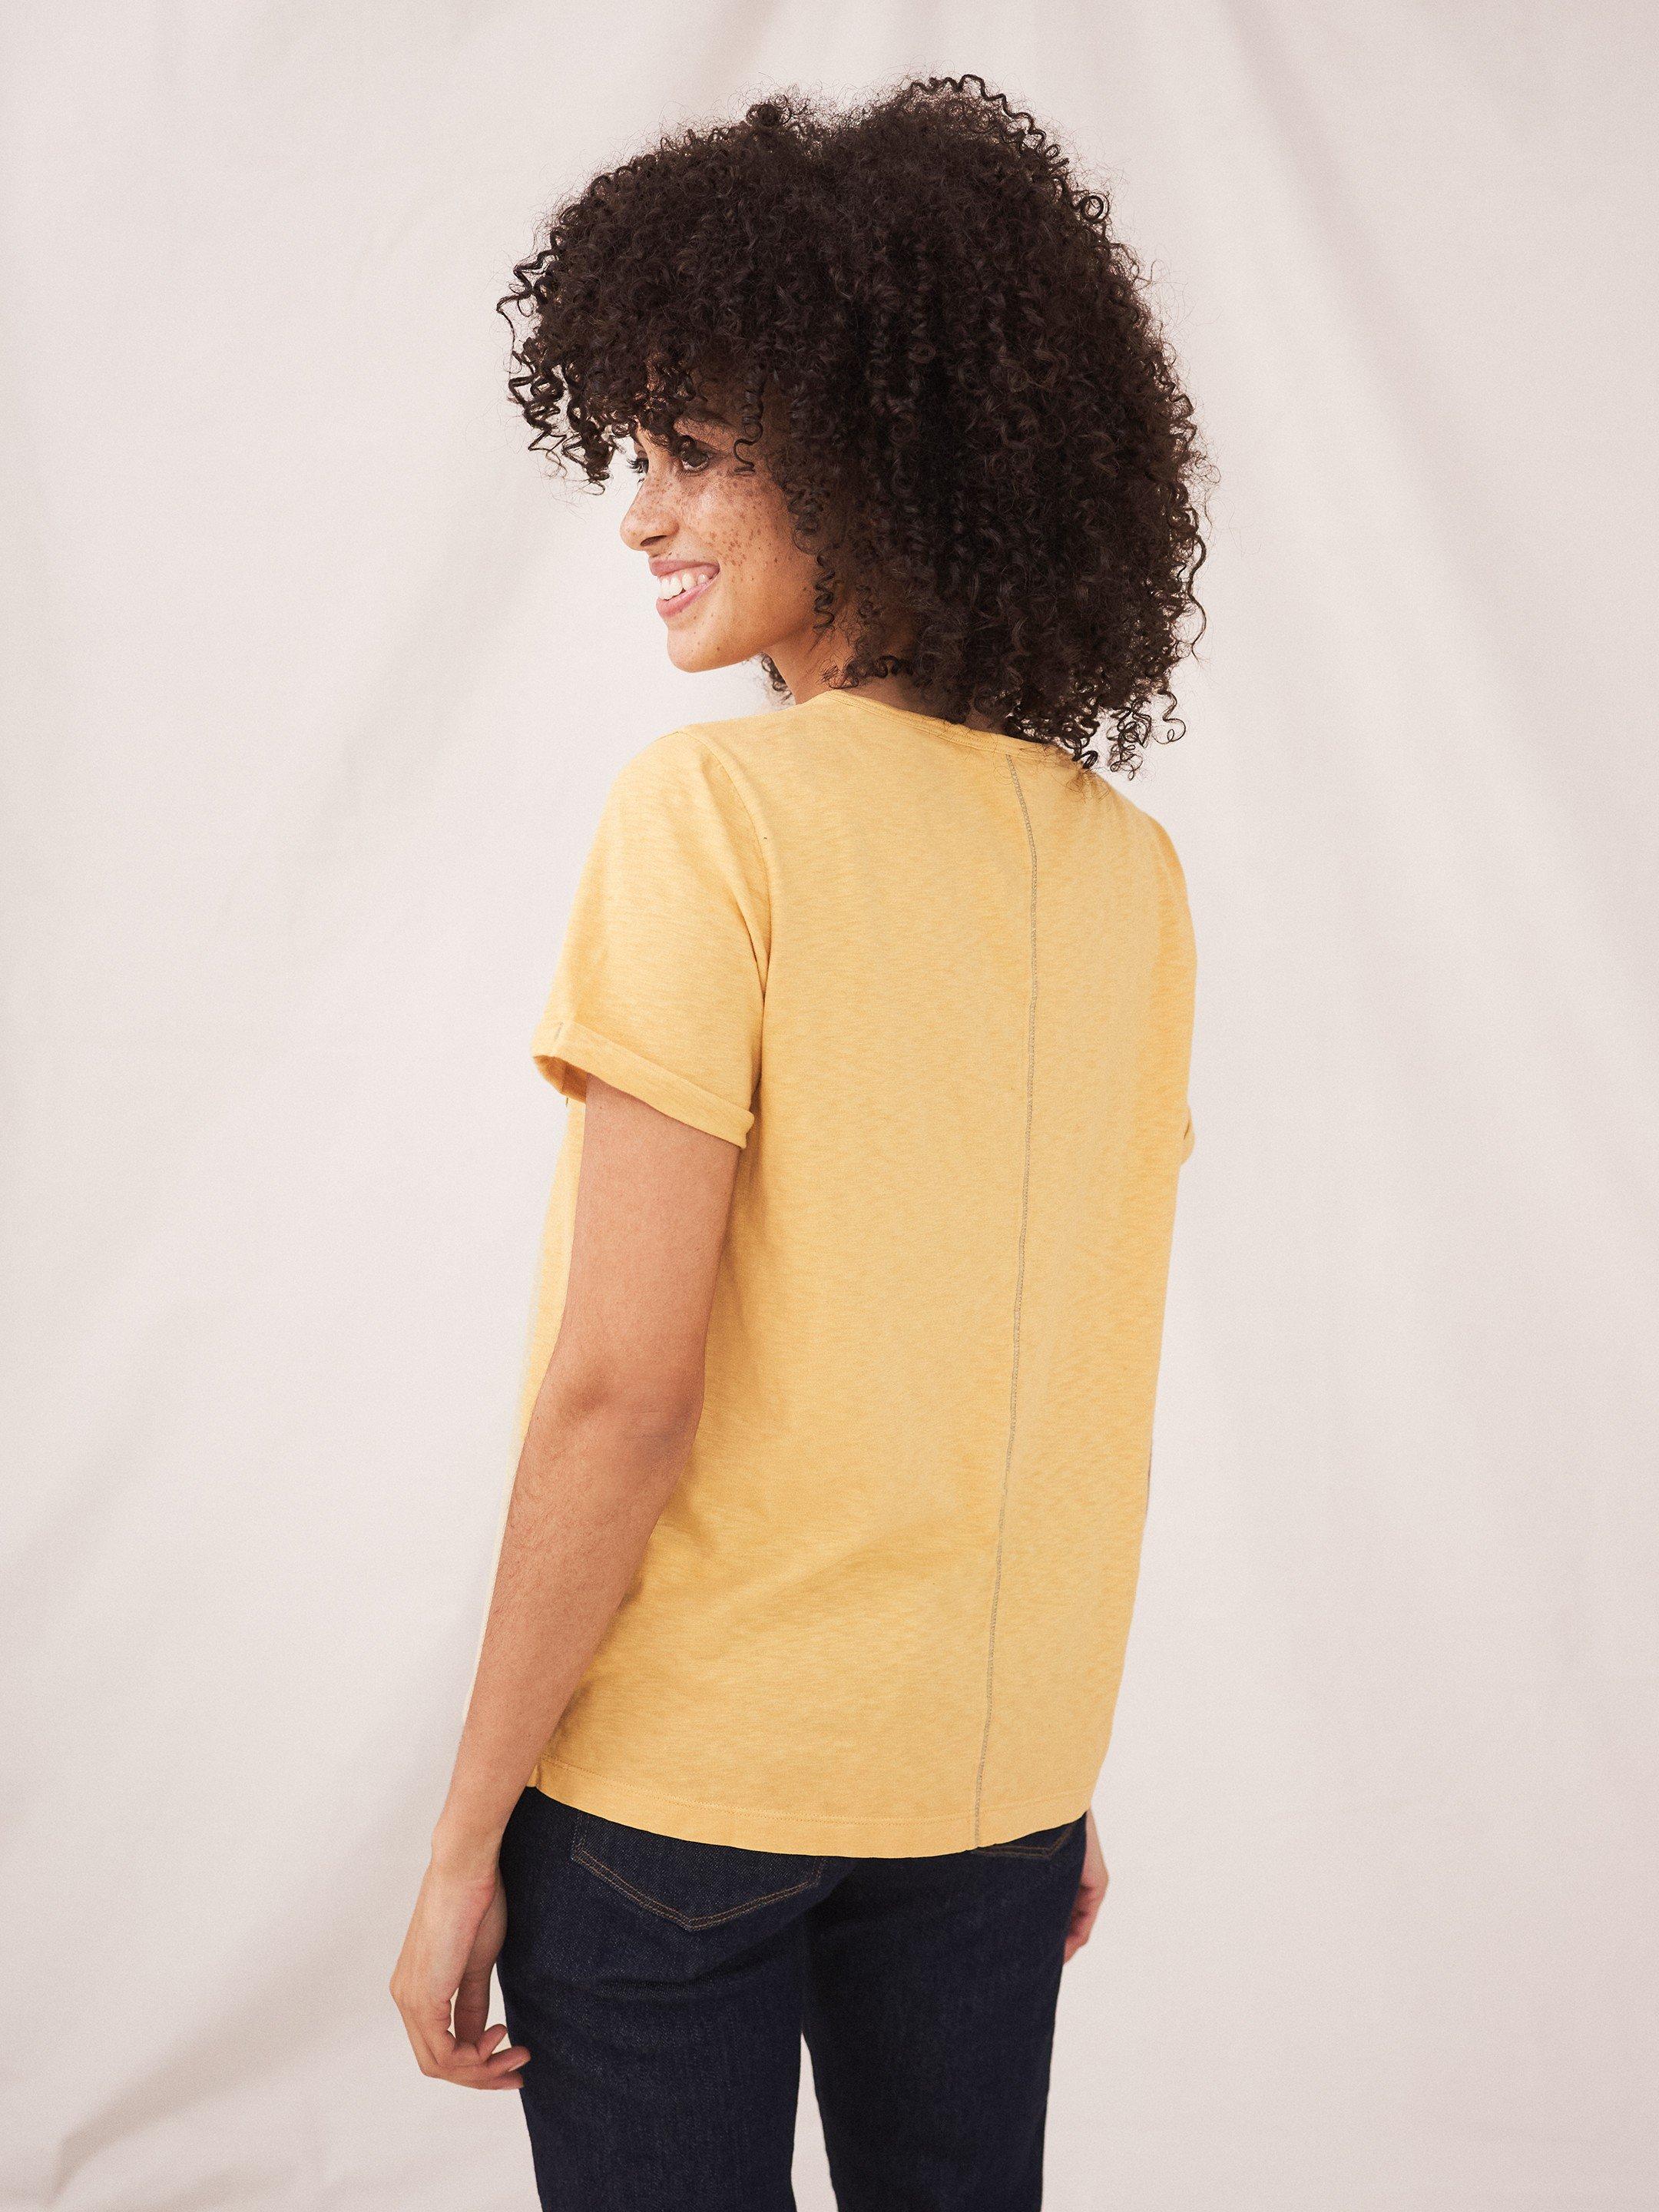 Neo Cotton Tee in MID YELLOW - MODEL BACK